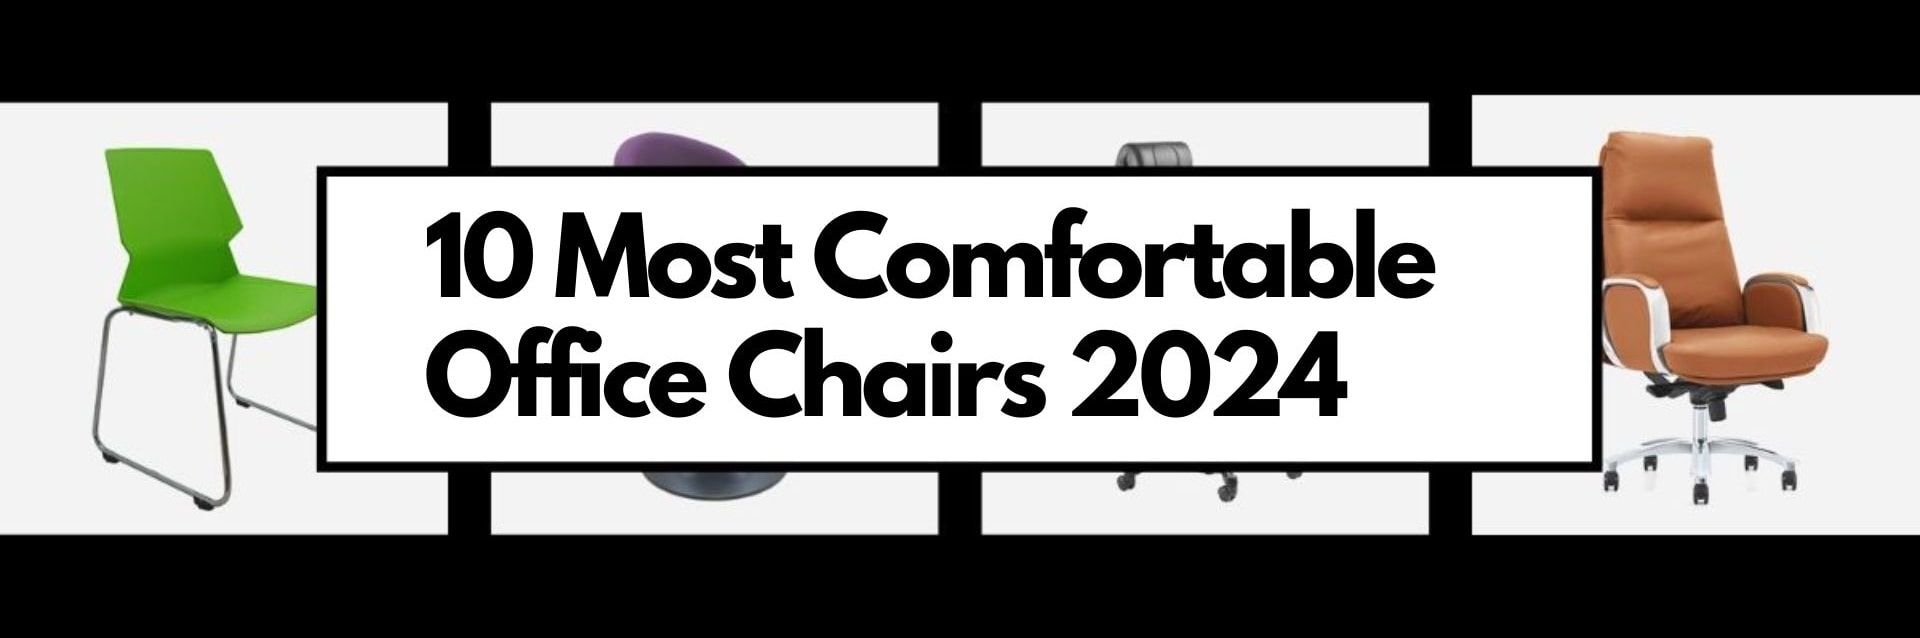 Most comfortable office chairs 2024.